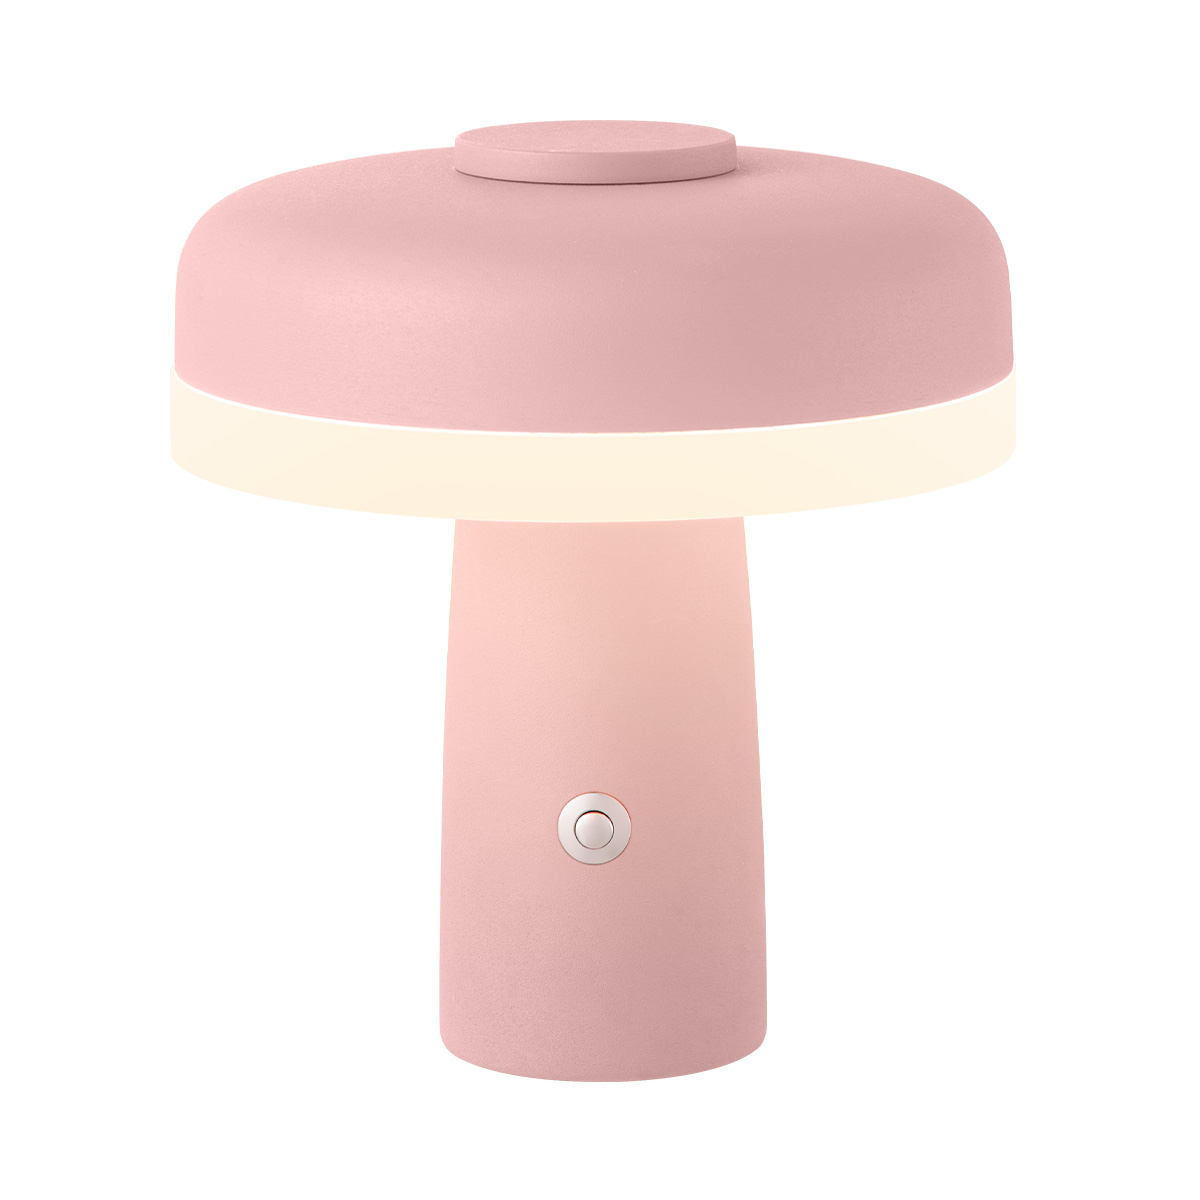 Tangla lighting - TLT7499-01RQ - LED Table lamp - rechargeable metal and glass - pink - rechargeable